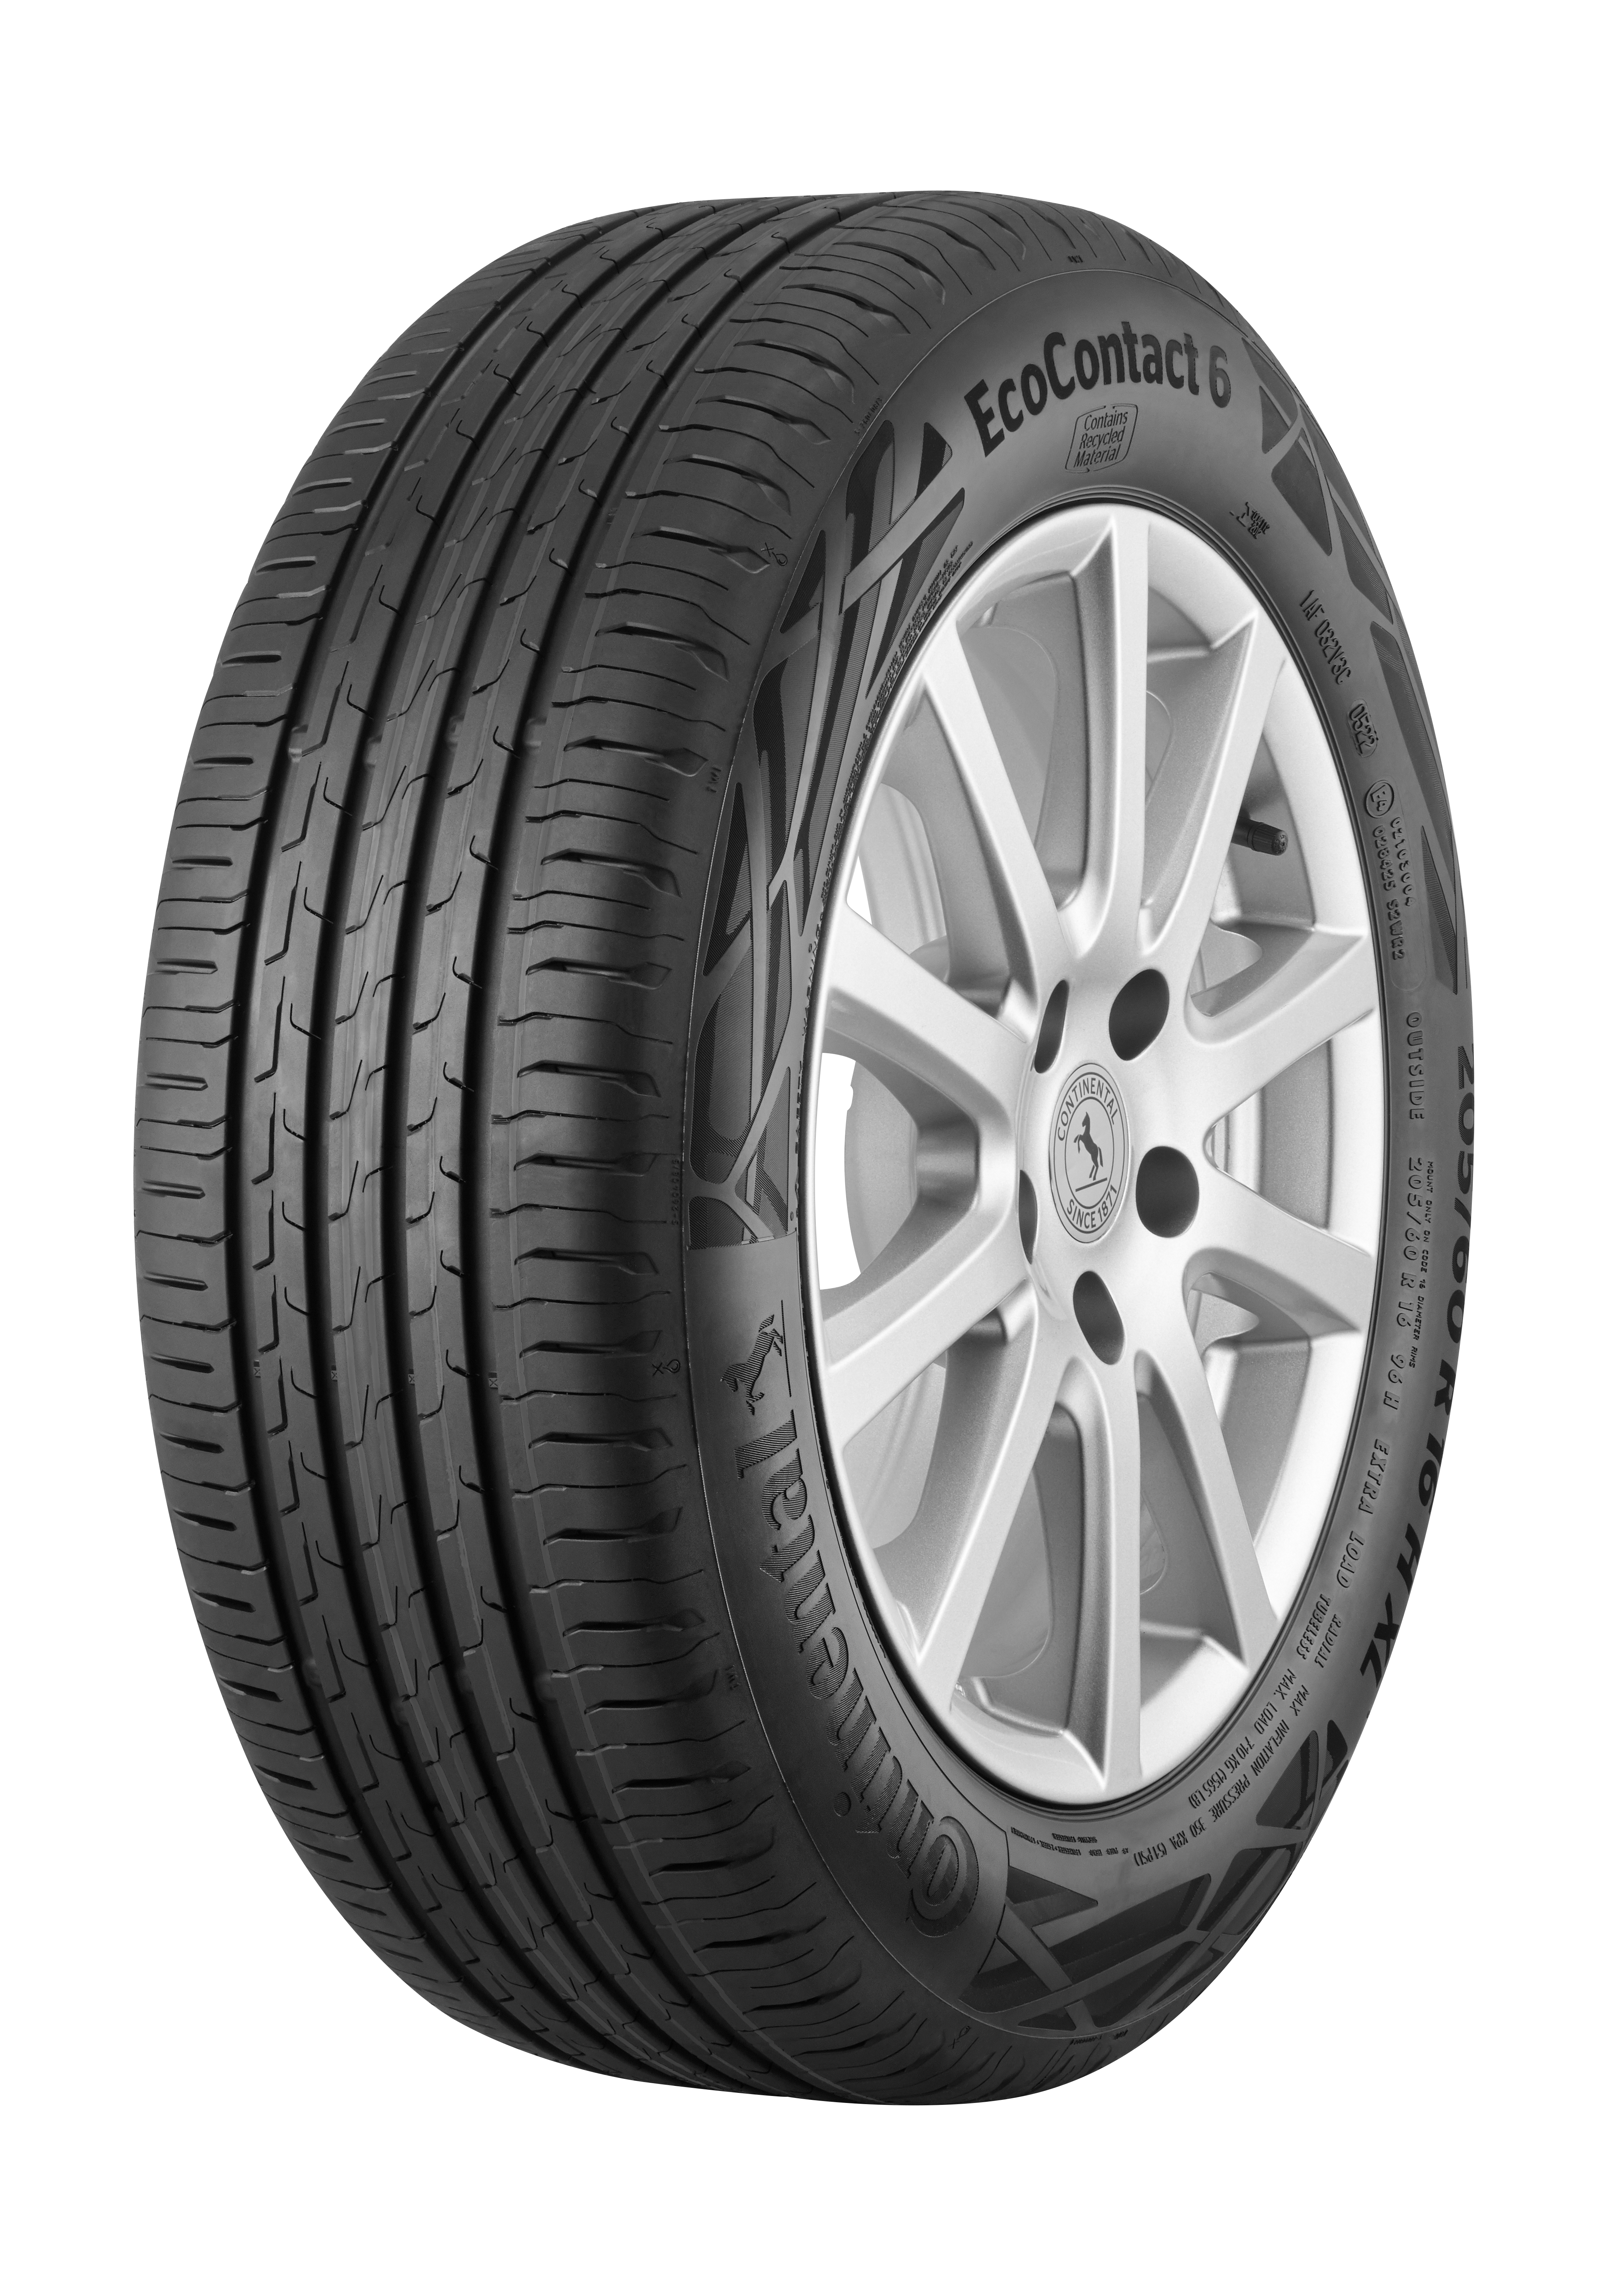 Continental Launches First Tires News from - Polyester Bottles Made Carbon Recycled PET with Renewable